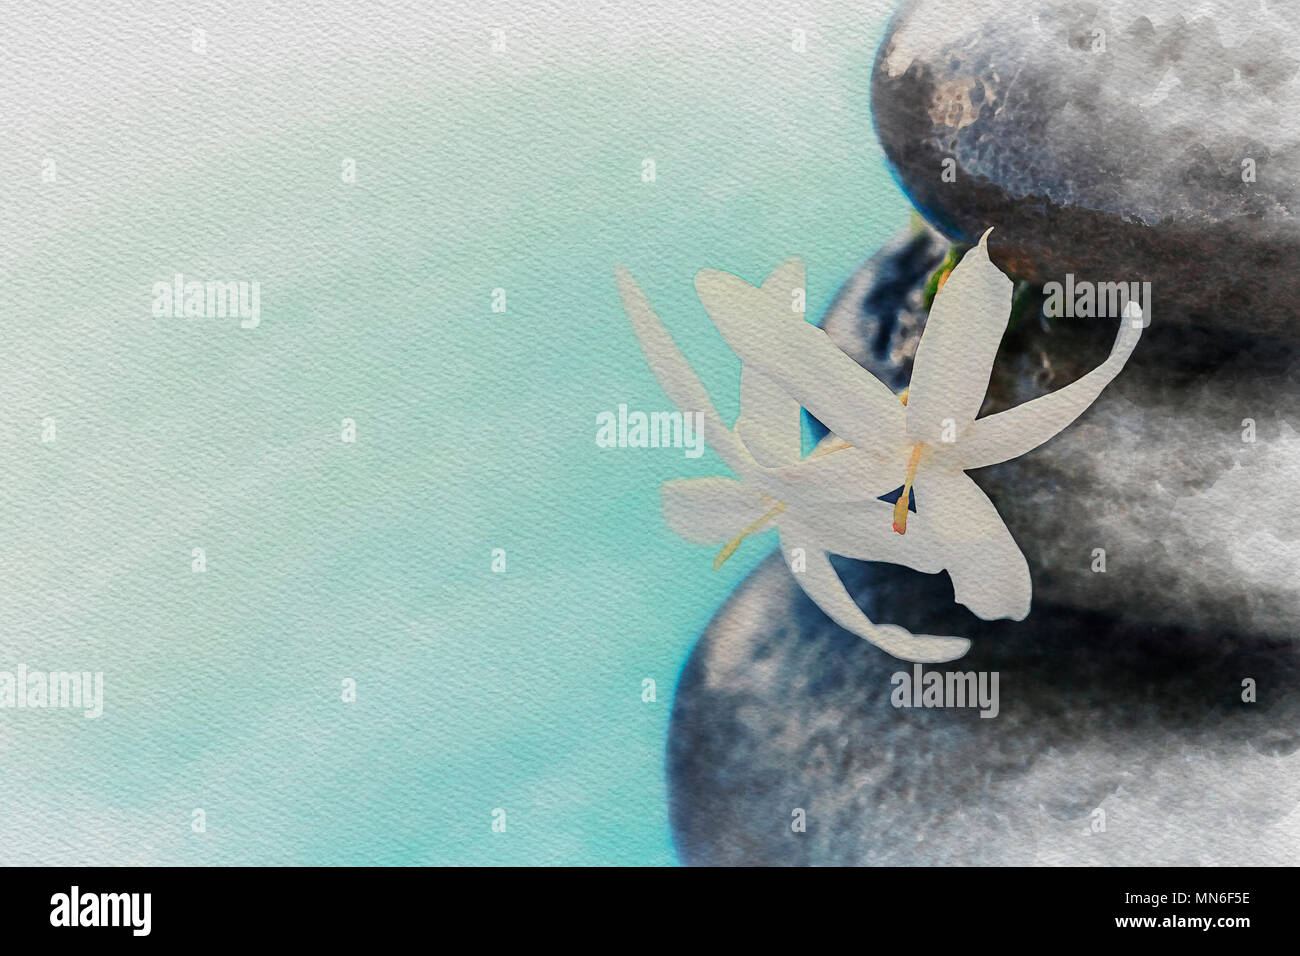 Digital Watercolor Painting Vintage style Zen meditation background, balanced stones with white flower stack under the water Stock Photo